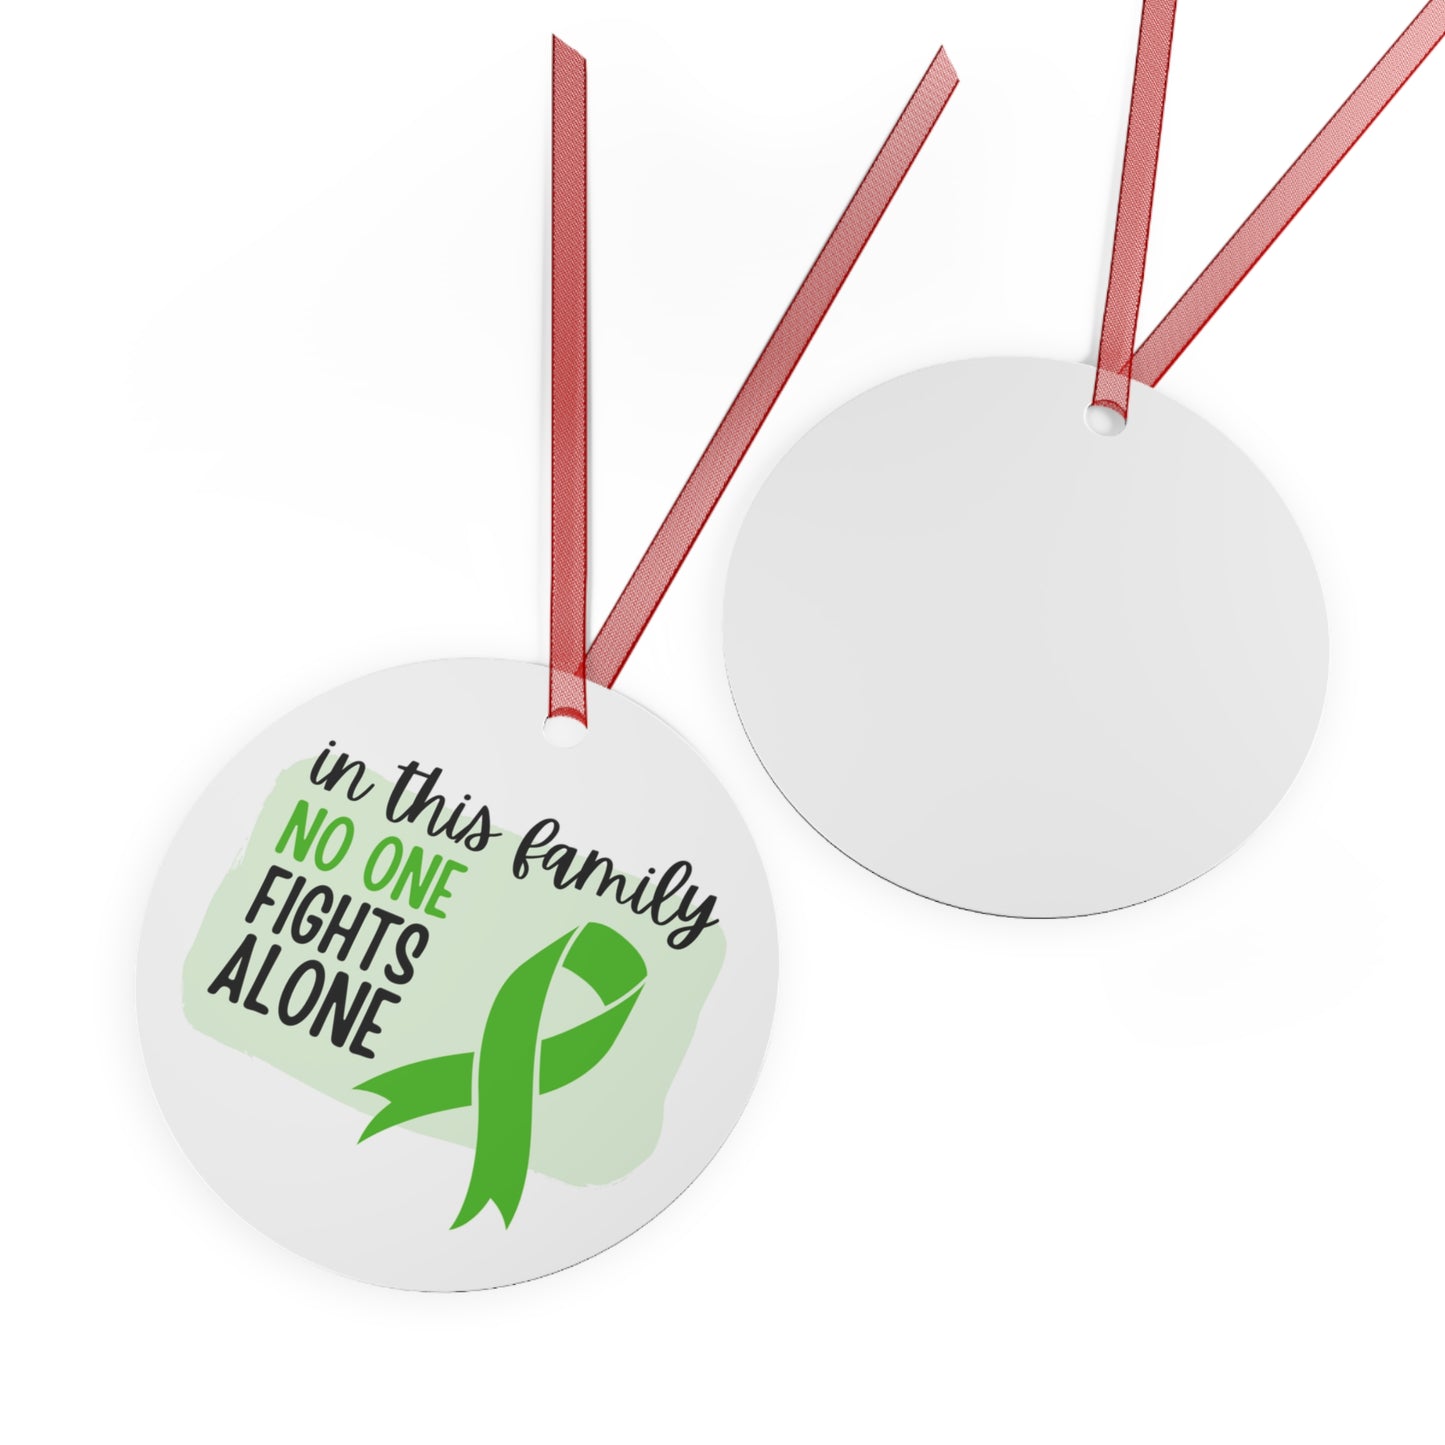 Gallbladder Cancer Ornament- Green Ribbon Awareness -In this family no one fights alone - Support for friend - Christmas Decor